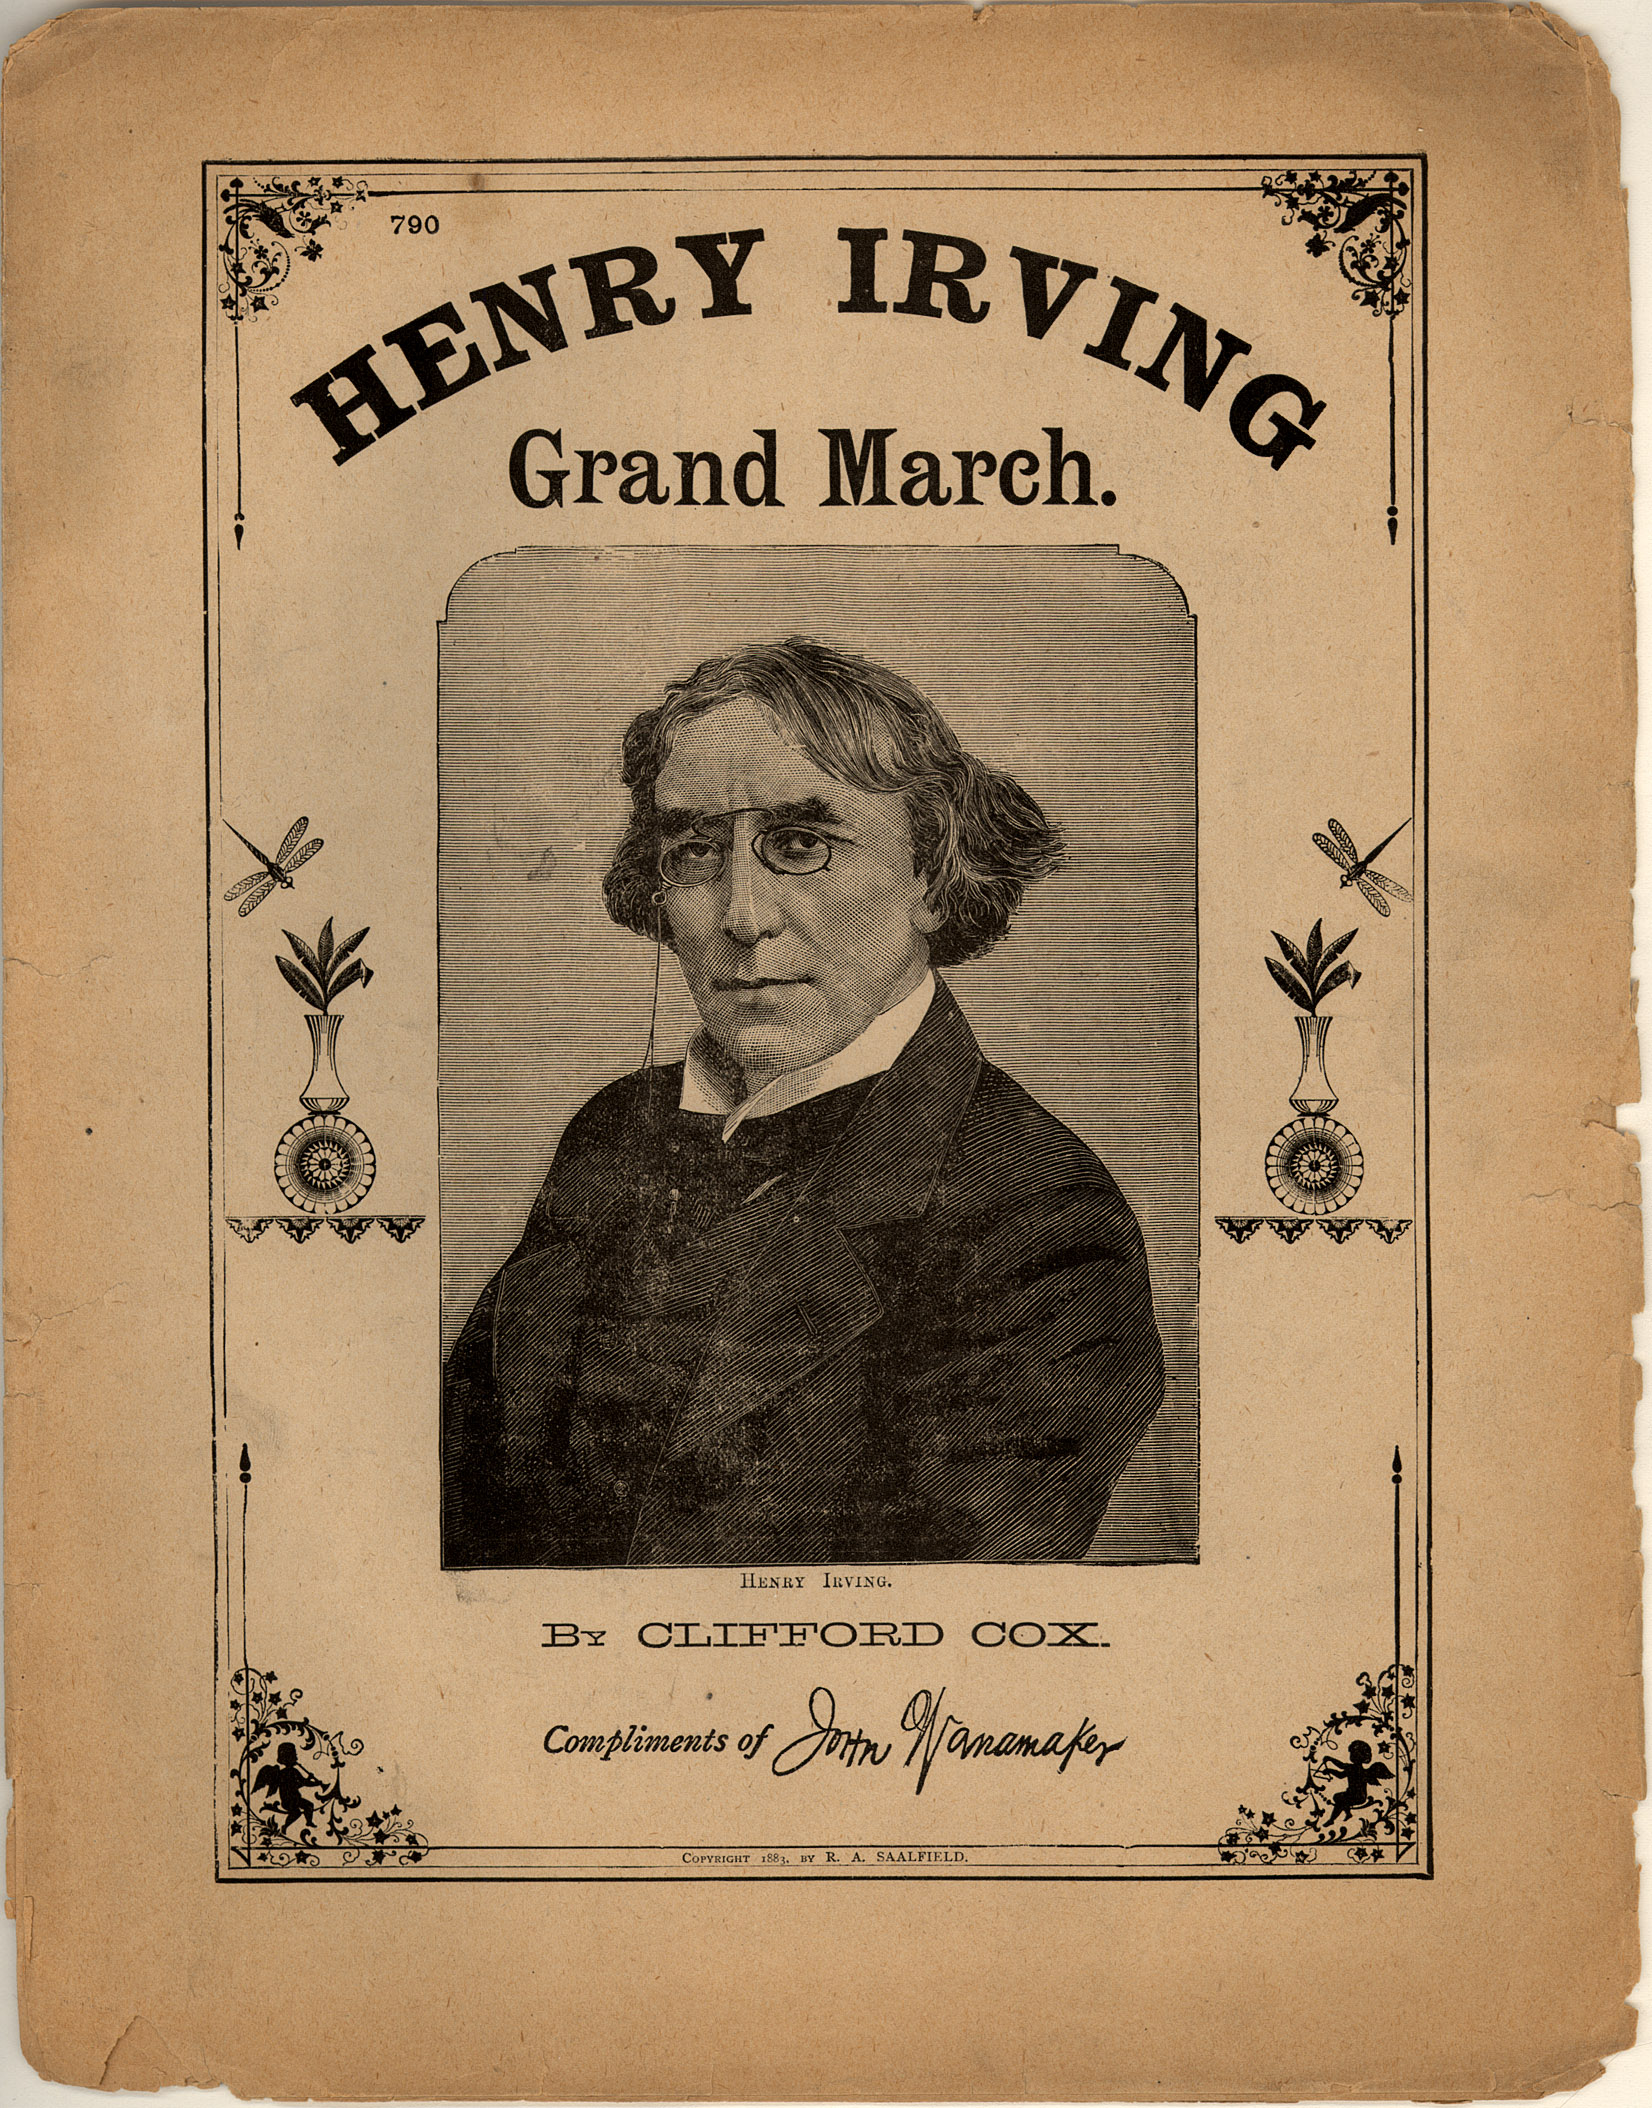 150dpi JPEG image of: Henry Irving grand march